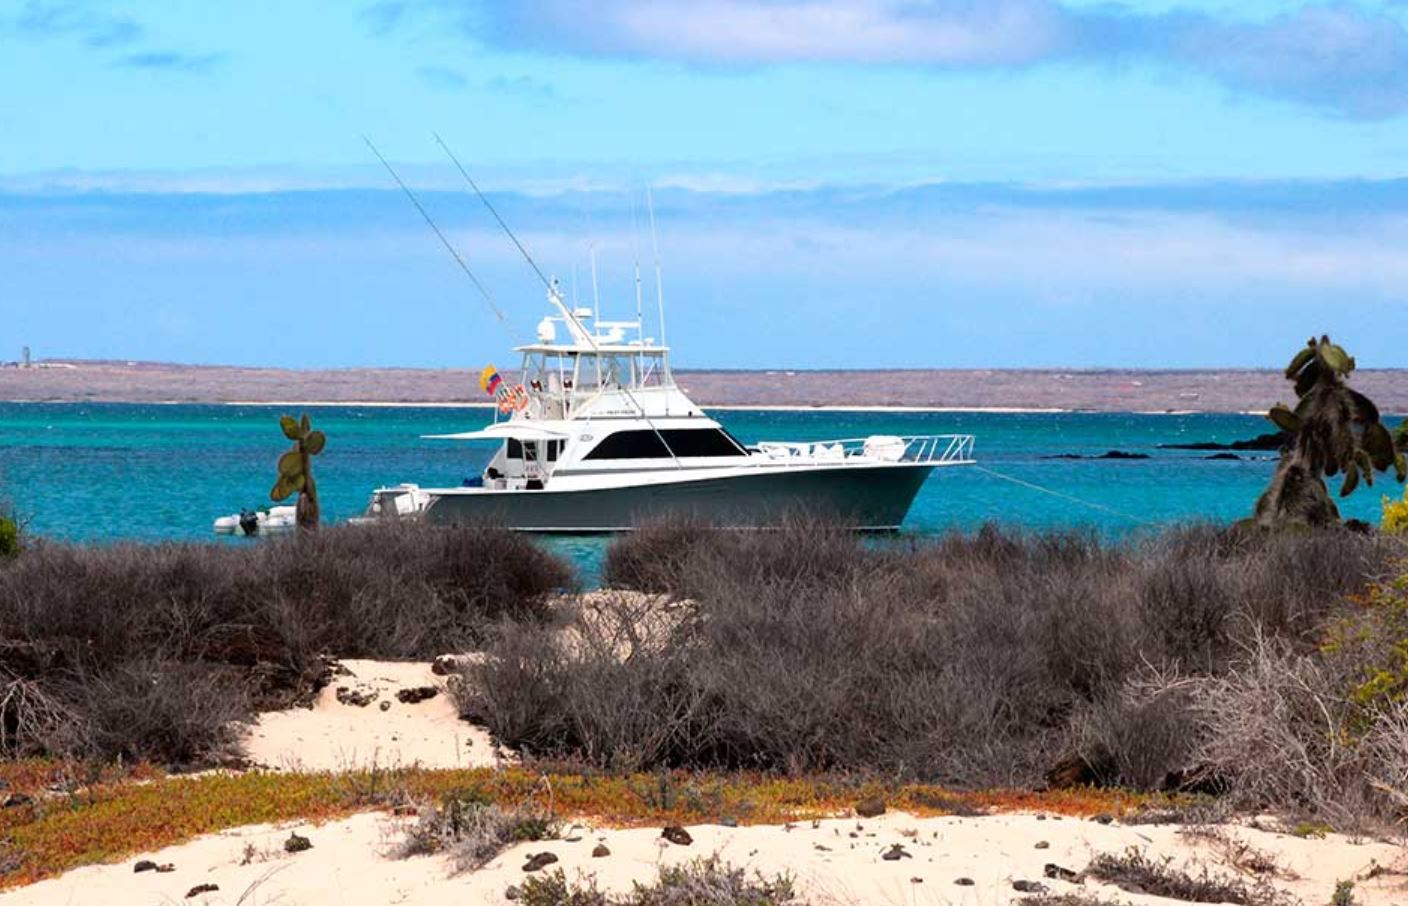 Altamar Yacht daily Galapagos tours from/to Island Baltra: Altamar Yacht daily Galapagos tours to Bartolomé, North Seymour, Plaza or Santa Fé from/to Baltra